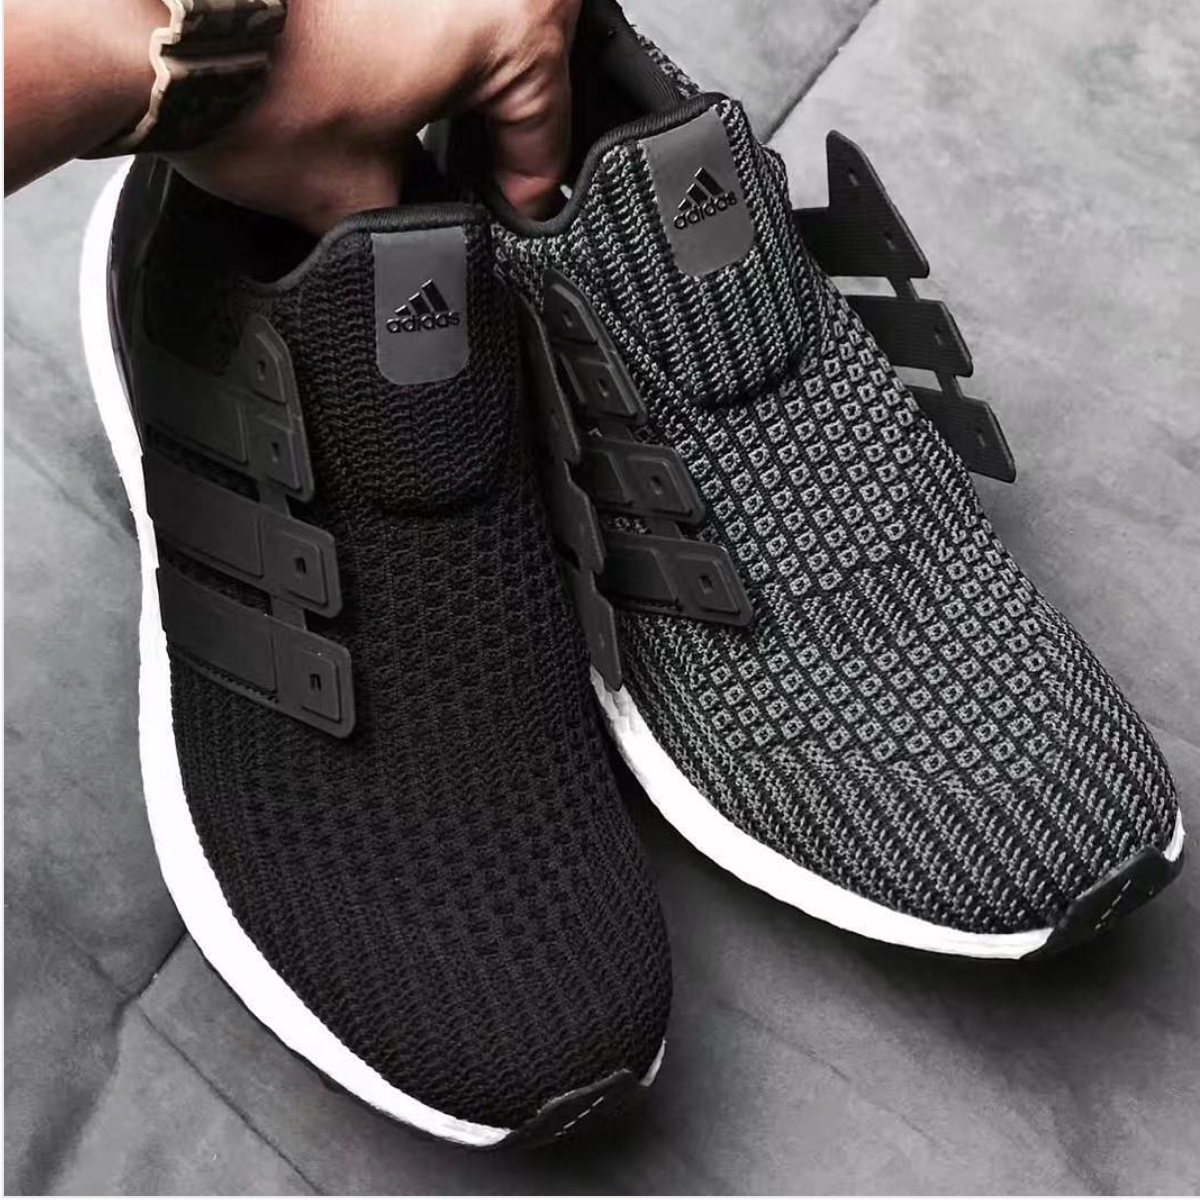 adidas Ultra Boost 4.0 could be dropping in December